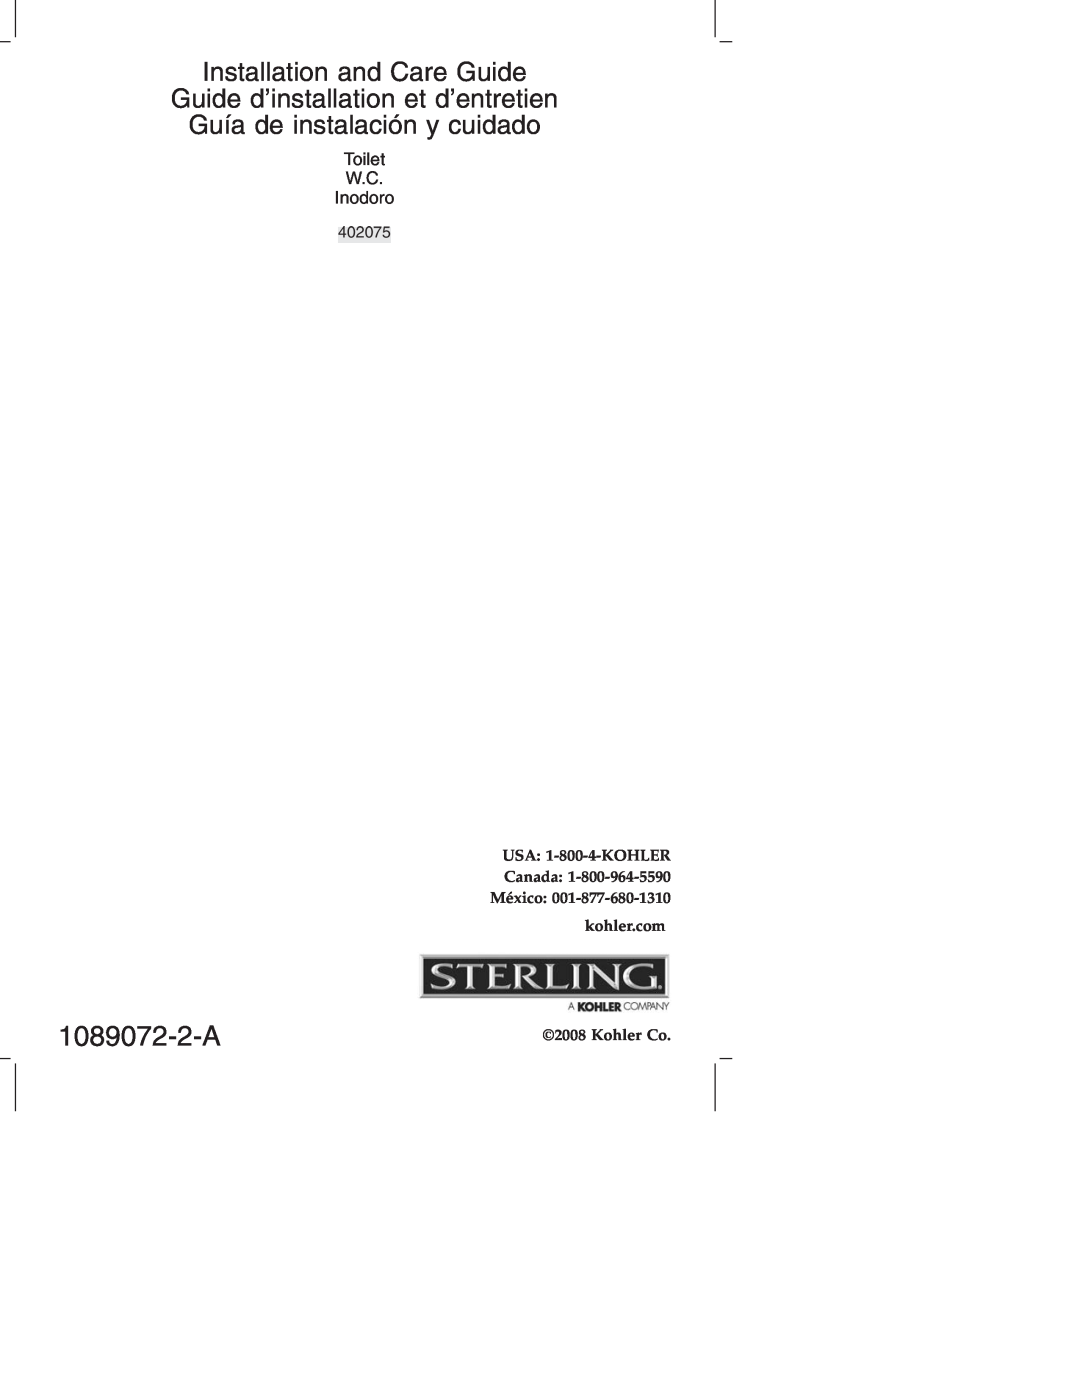 Sterling Plumbing 402075 manual 1089072-2-A, Installation and Care Guide, Guide d’installation et d’entretien, Kohler Co 